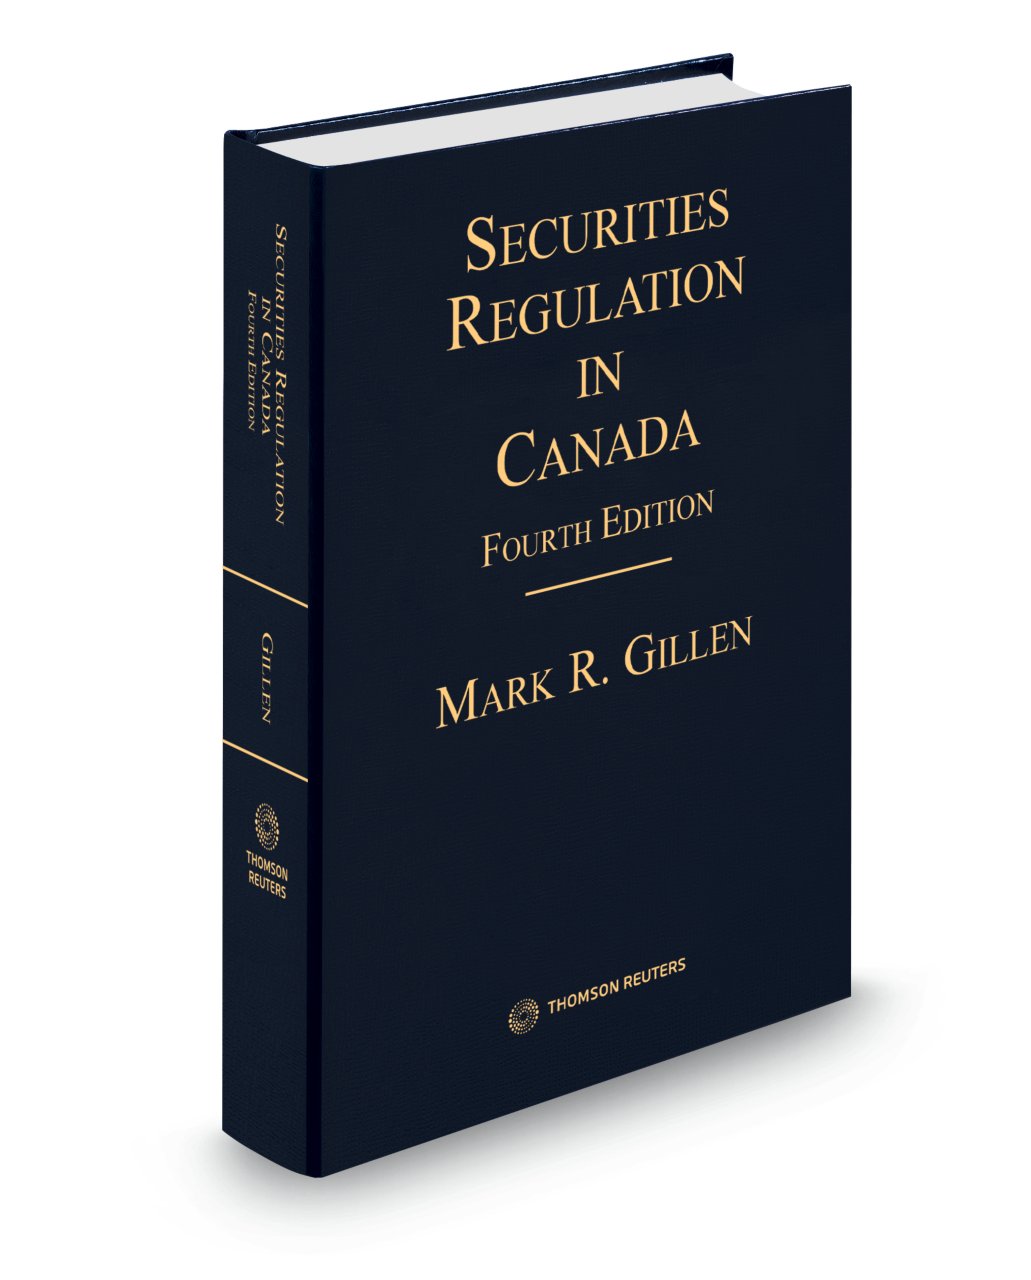 Cover of Securities Regulation in Canada, 4th Edition.